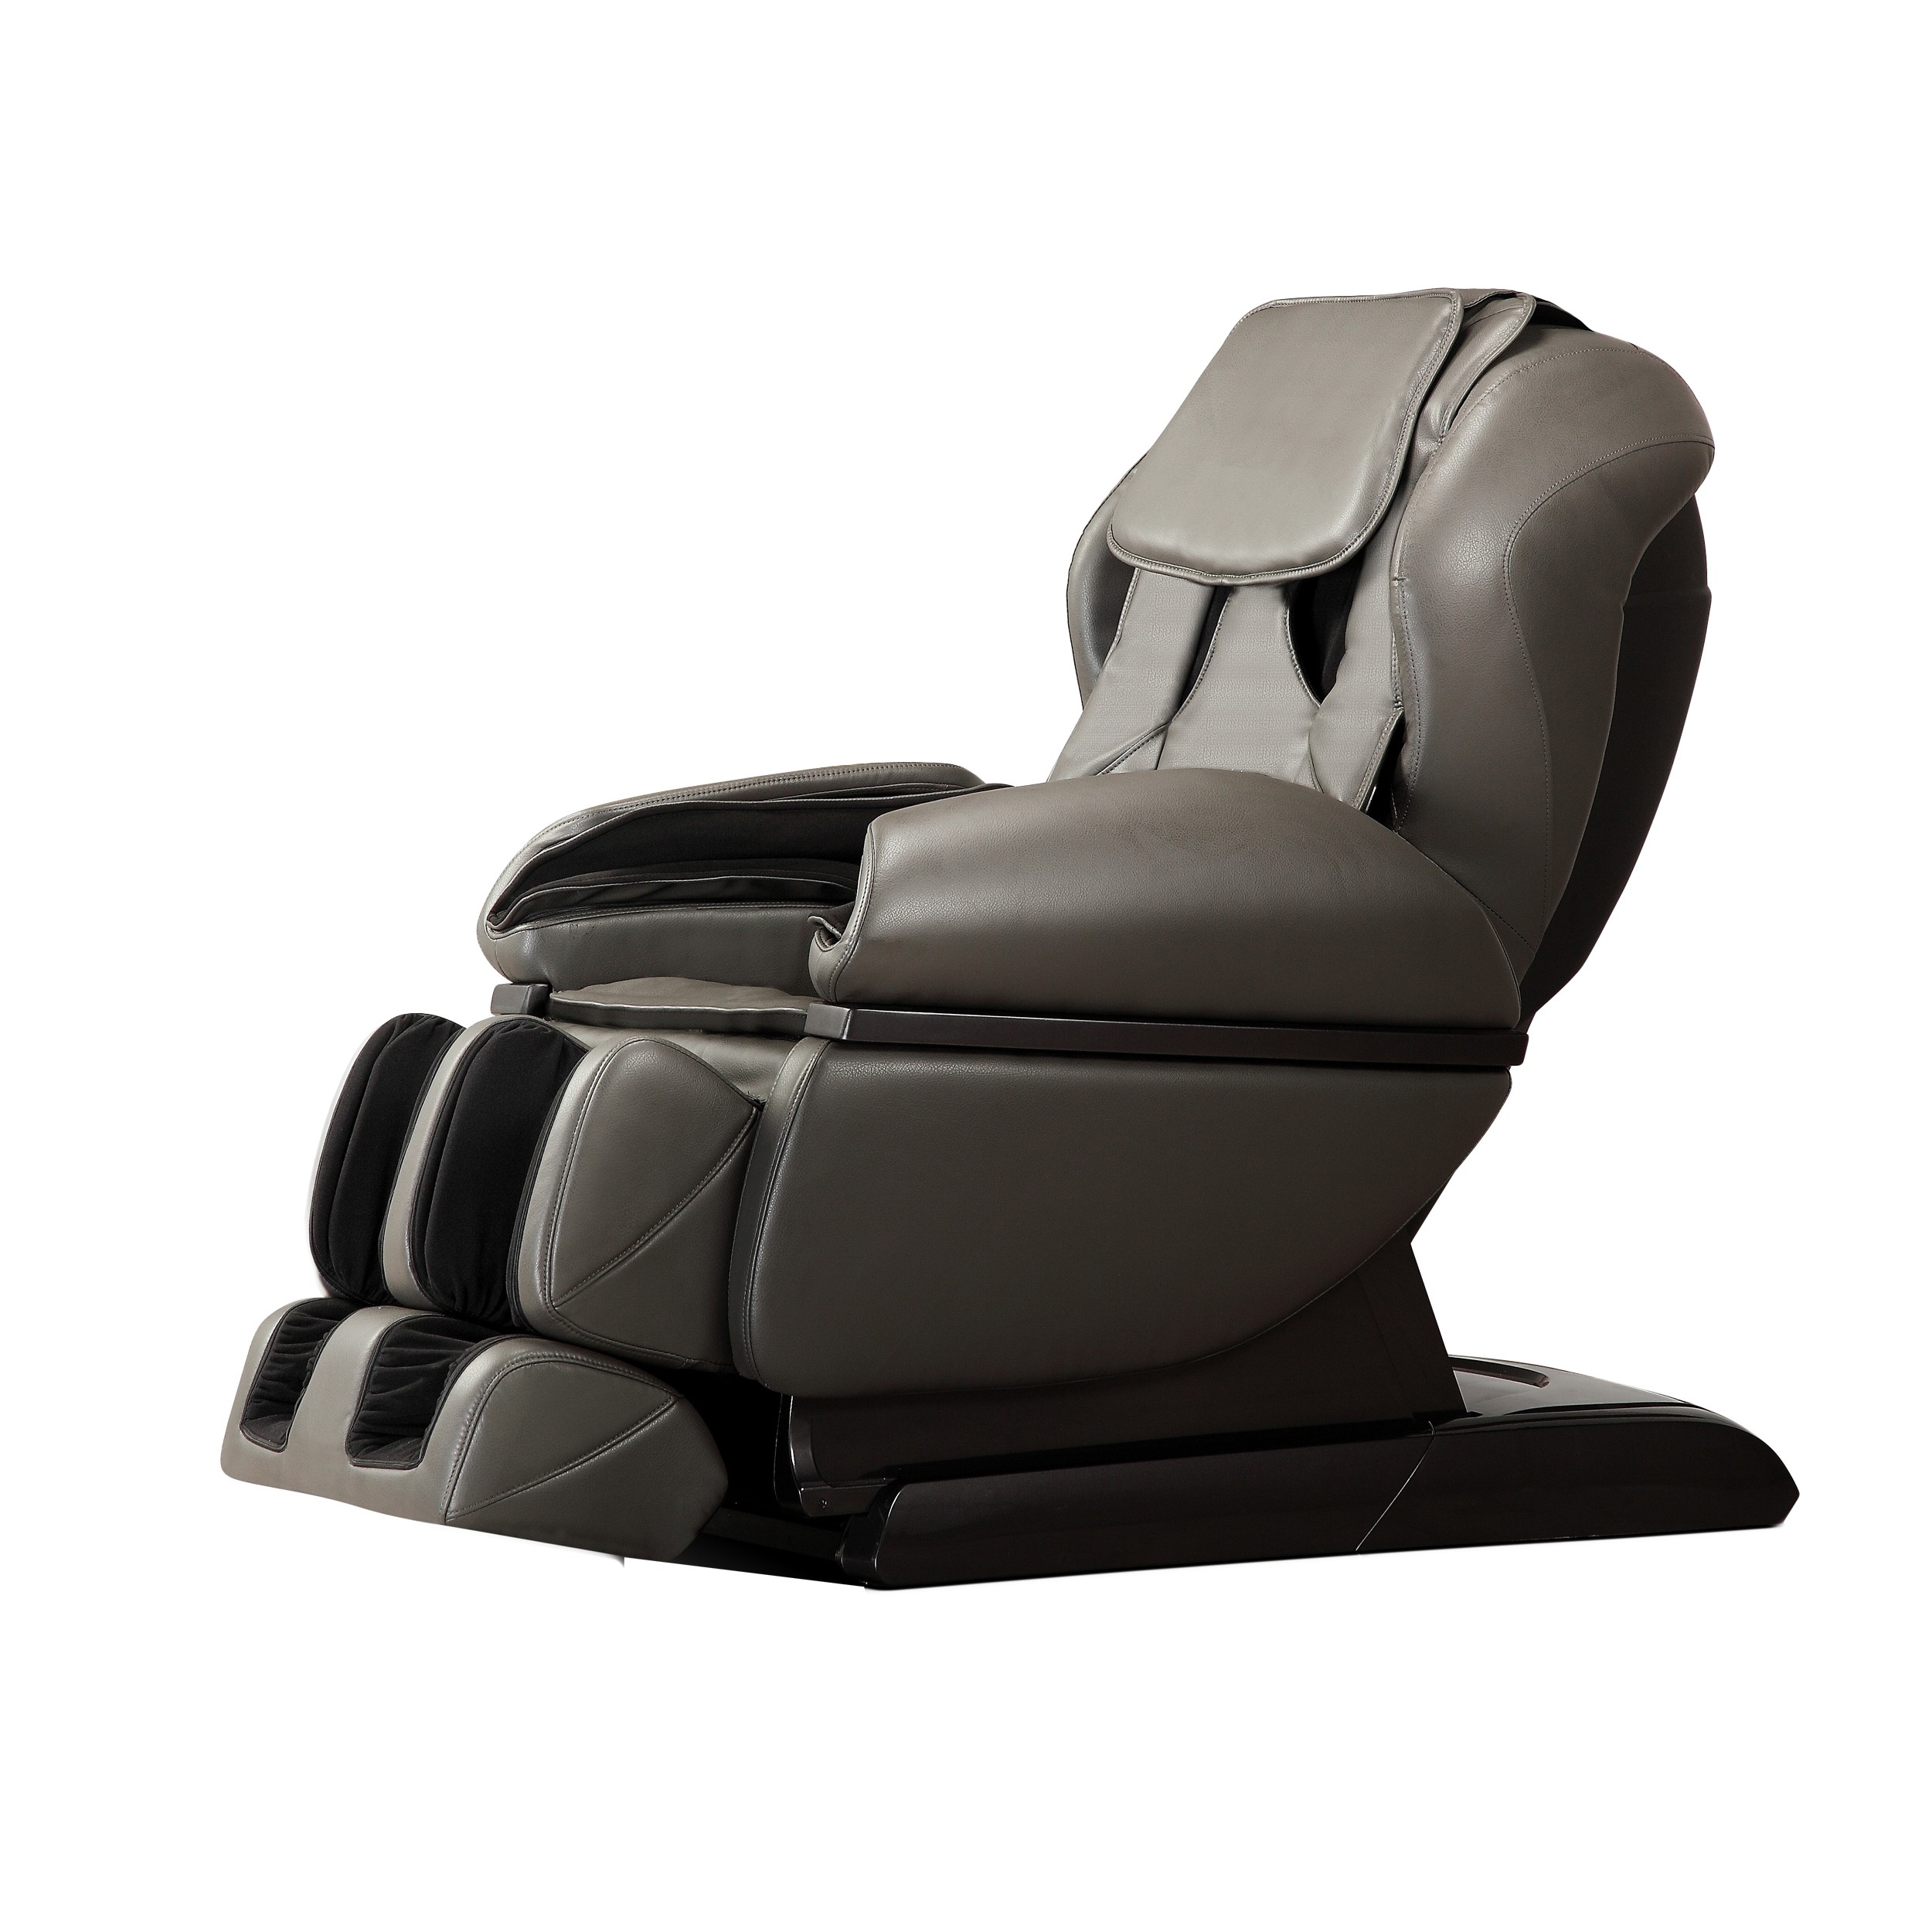 8 Best Reclining Massage Chairs On the Market - Reviews - Foter